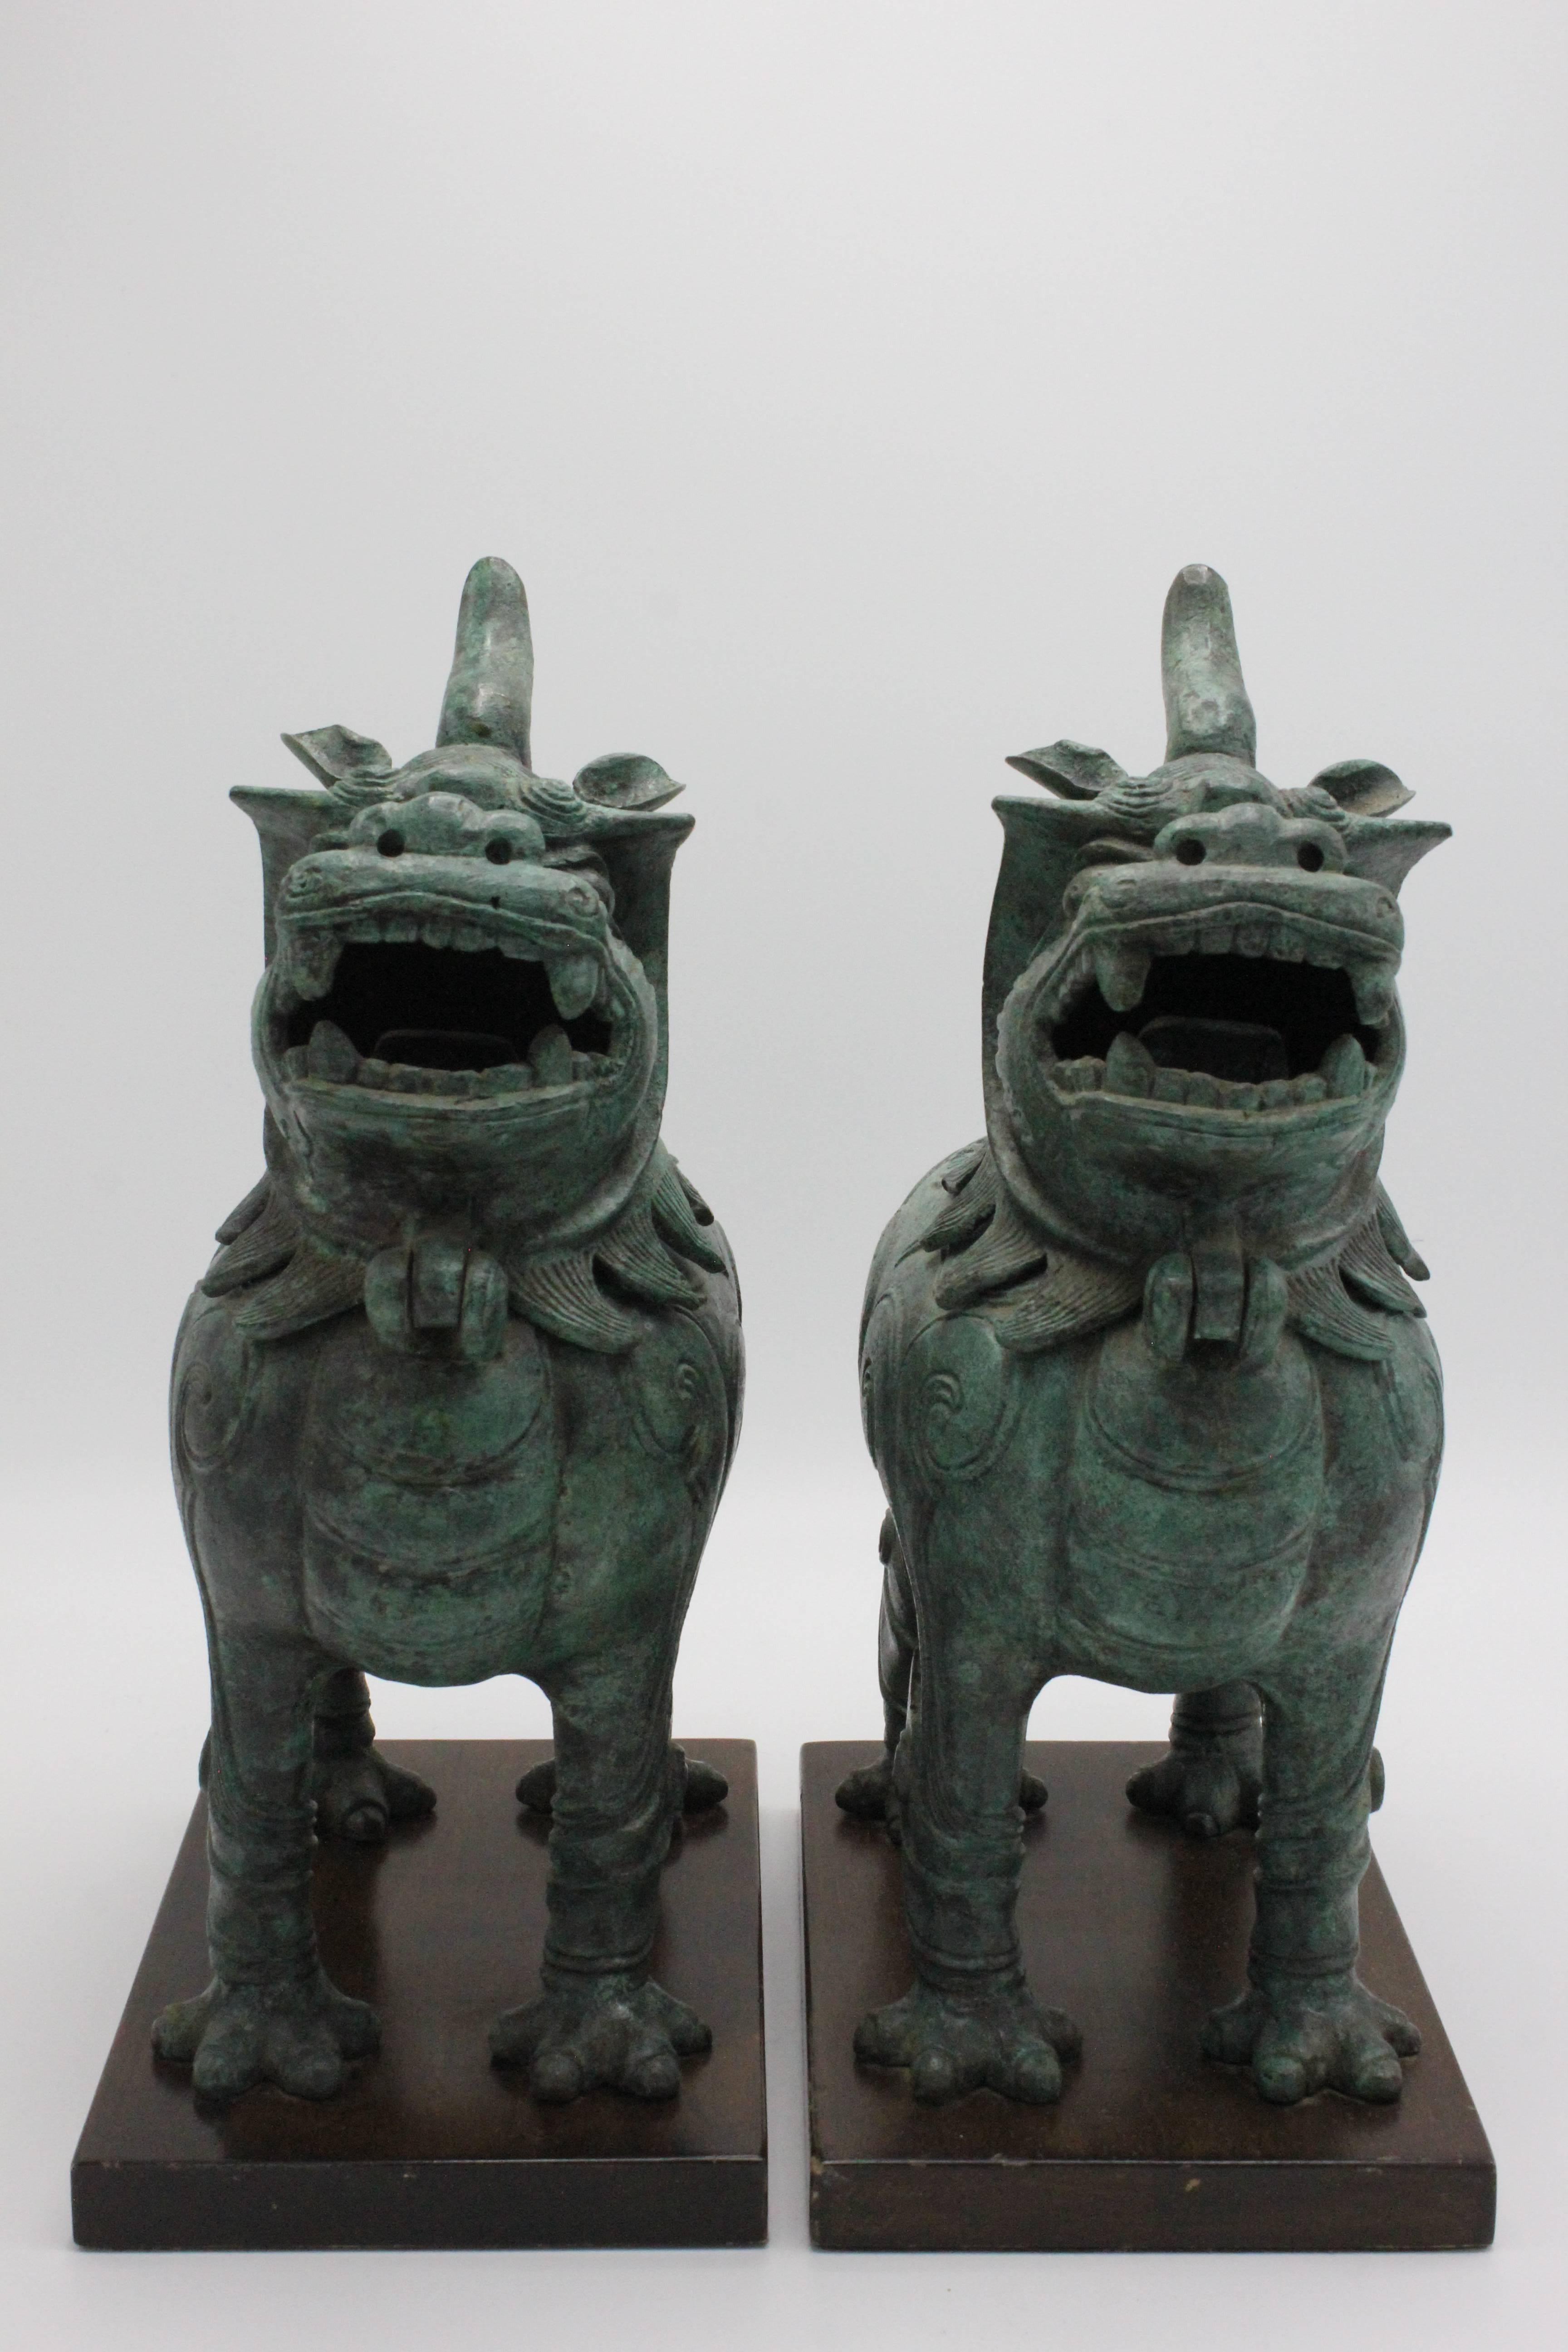 Pair of Frederick Cooper foo dog sculptures on wood bases. The head of each dog tilts back for use as an incense burner. Each pieces weighs approx. 14 pounds. Frederick Cooper label affixed underneath.